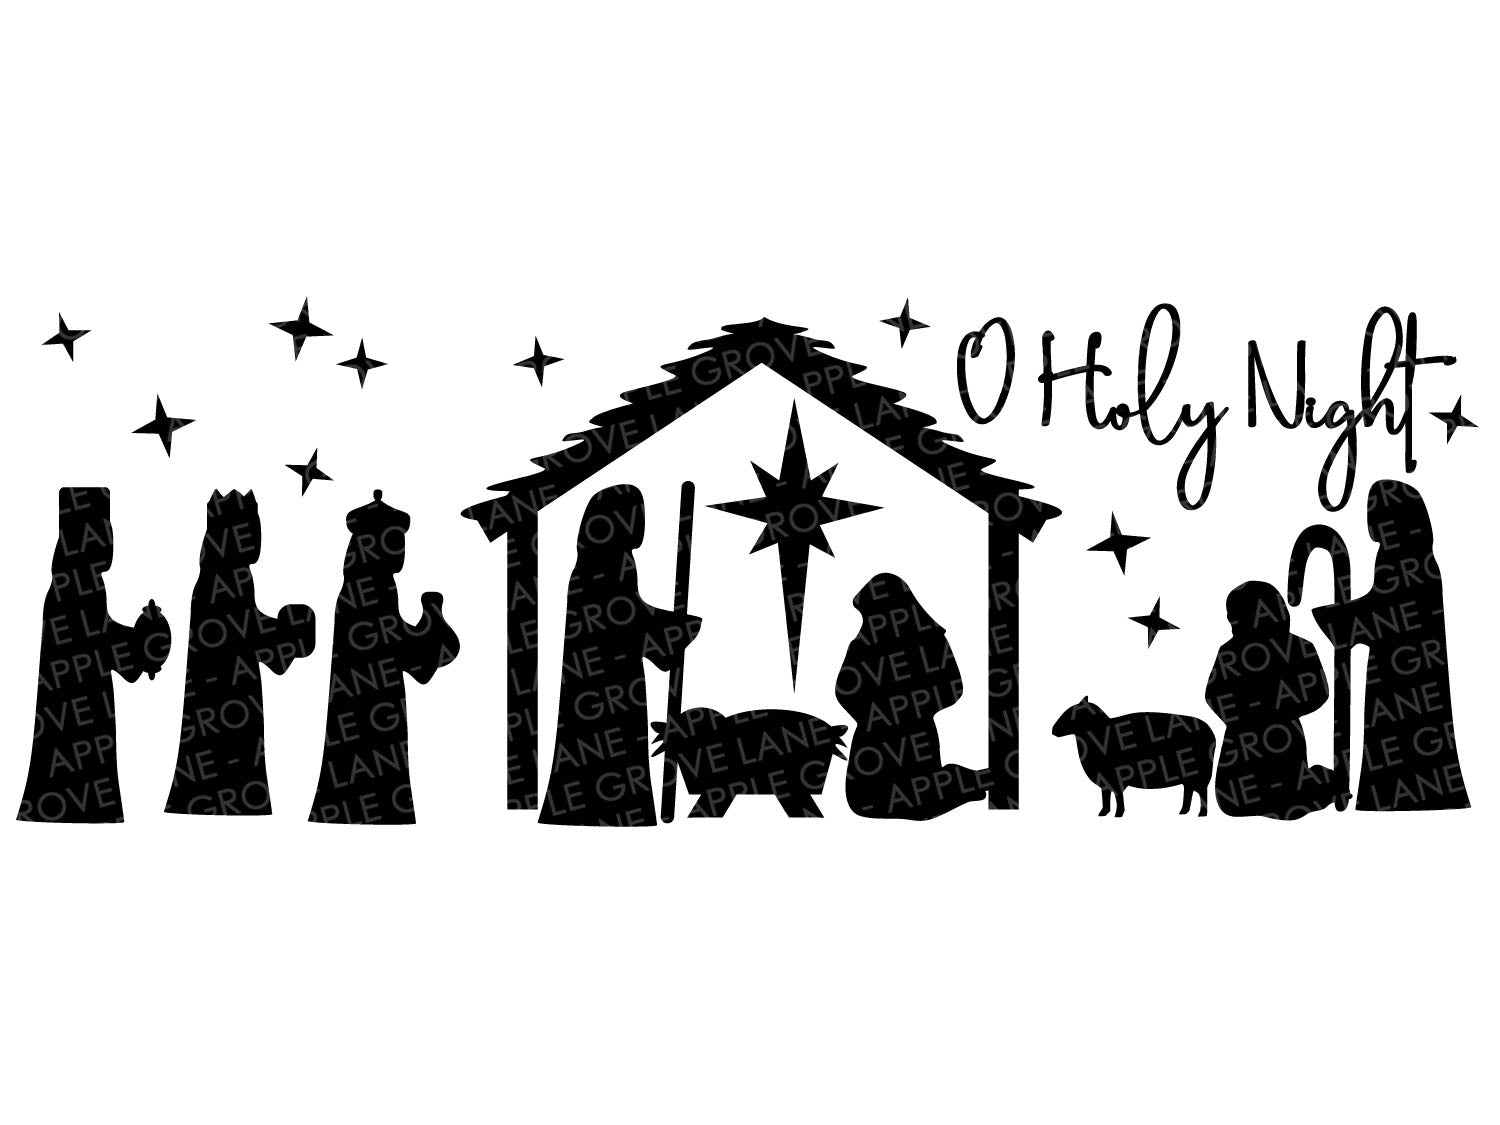 Download 24 Christmas Nativity Christmas Svg Files For Crafters 118704 Cut Files Design Bundles 10 Nativity Svg Files Images Yellowimages Mockups